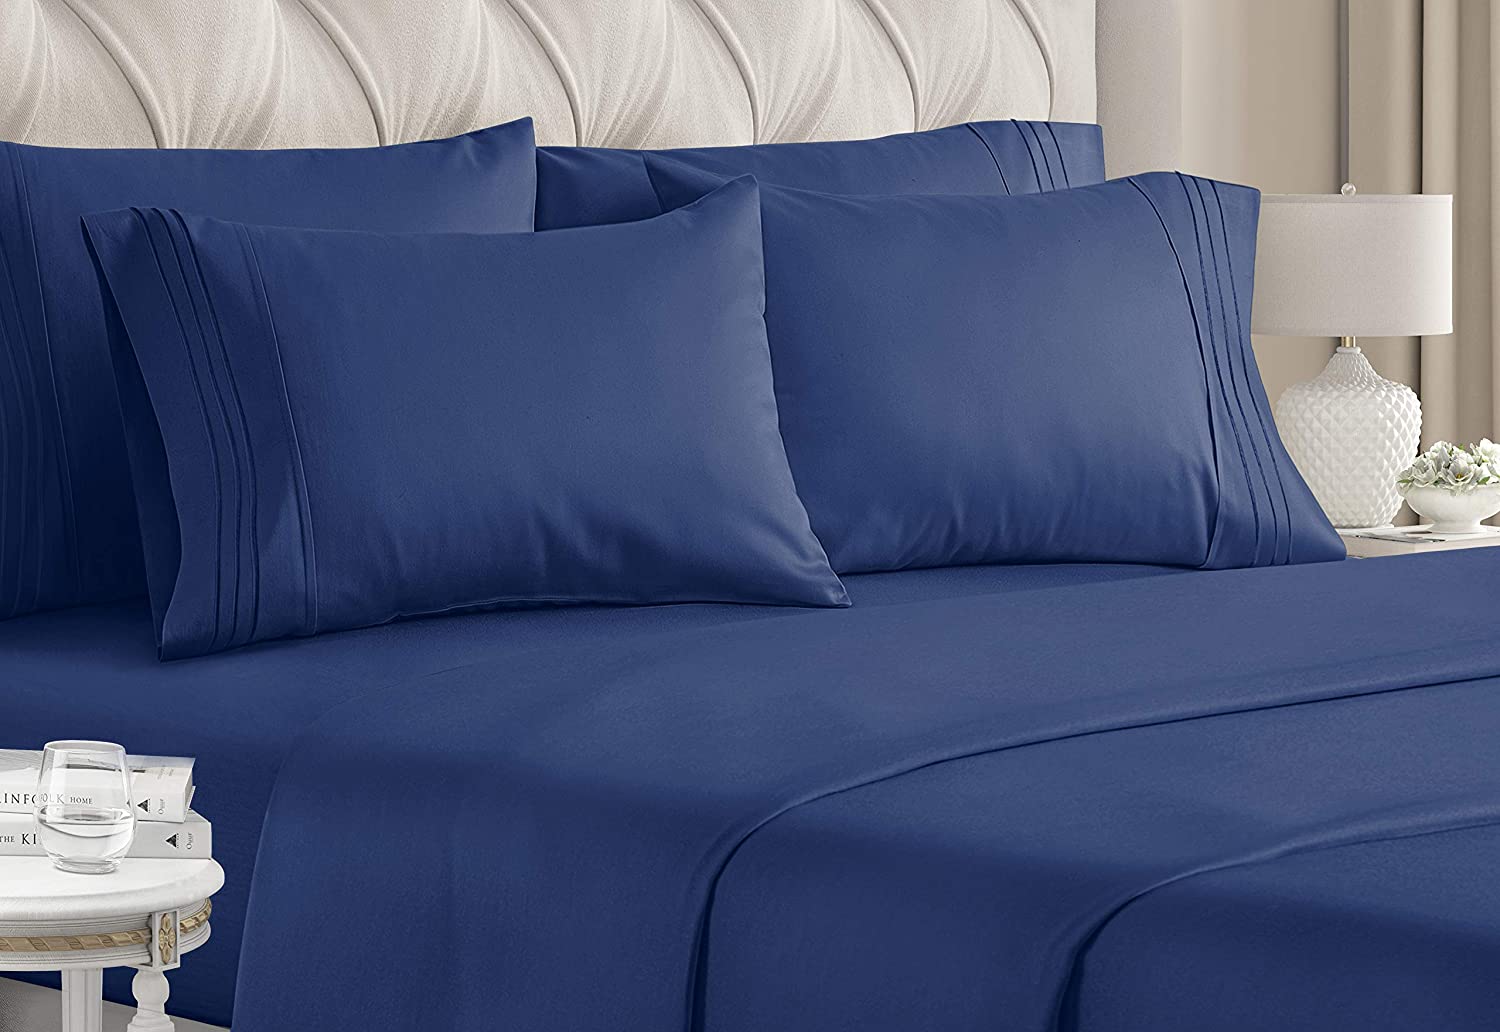 Why New Sheets Will Make Your Bed So Much Better